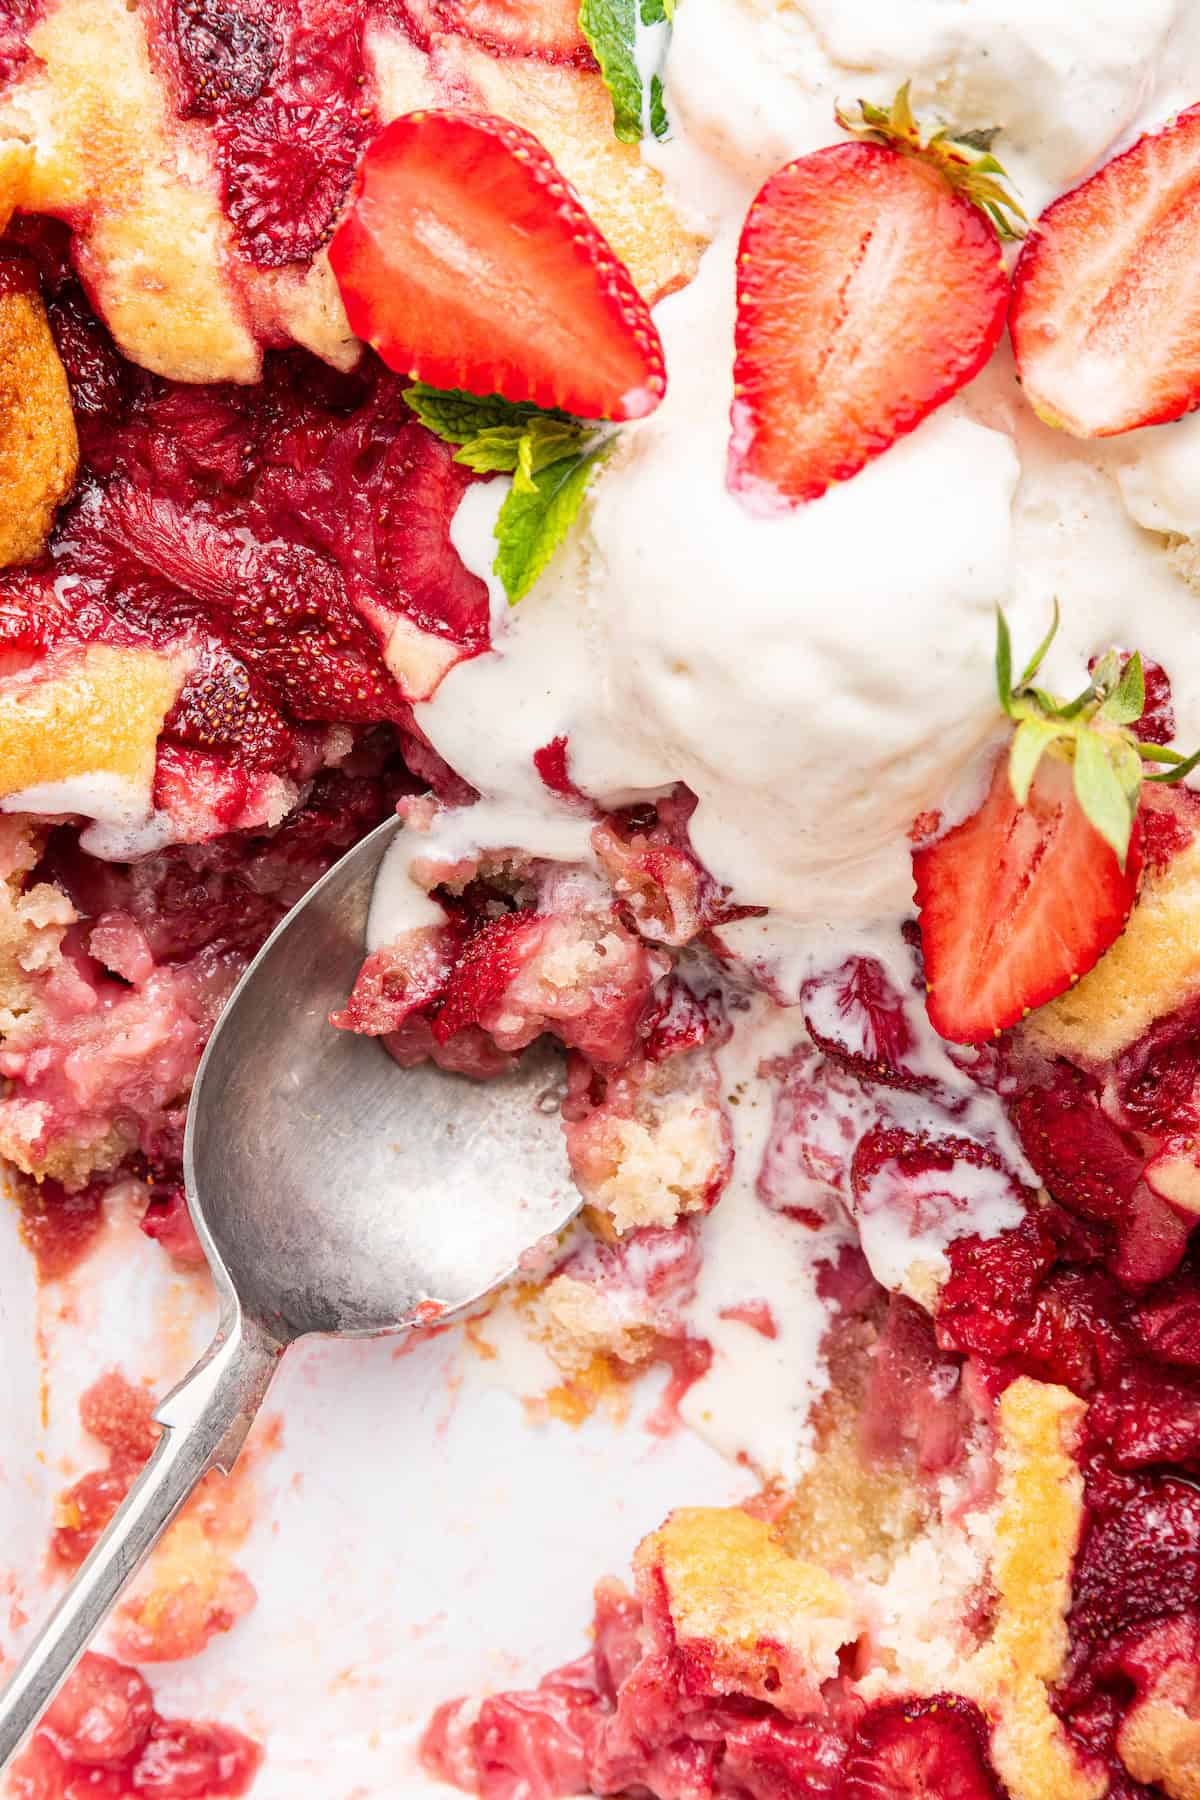 Pan of strawberry cobbler with ice cream and spoon